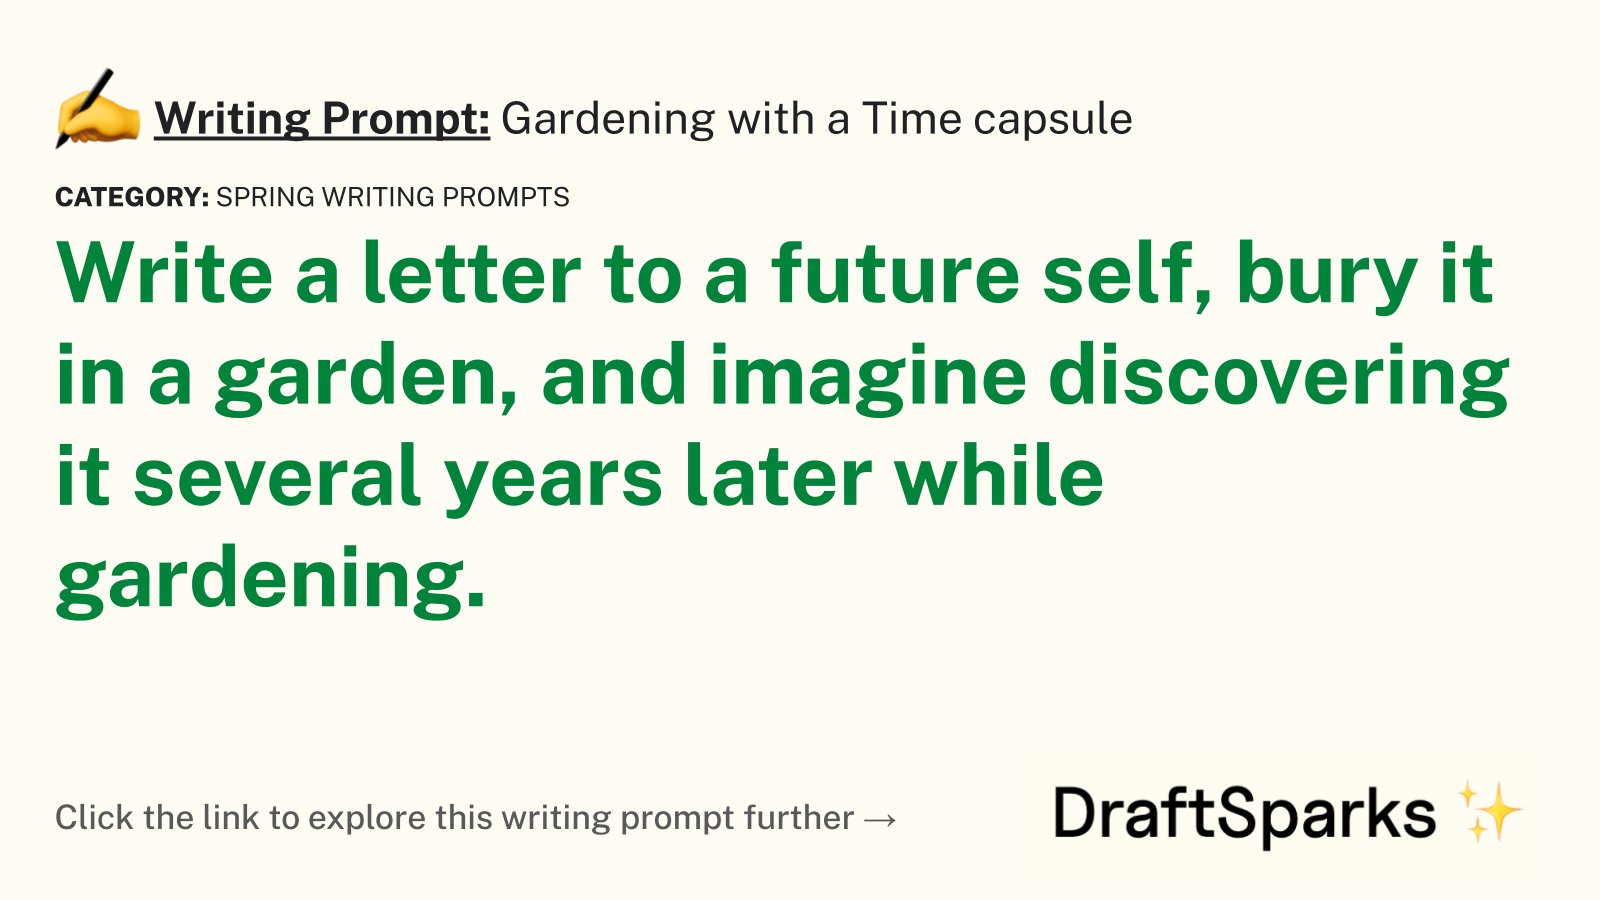 Gardening with a Time capsule